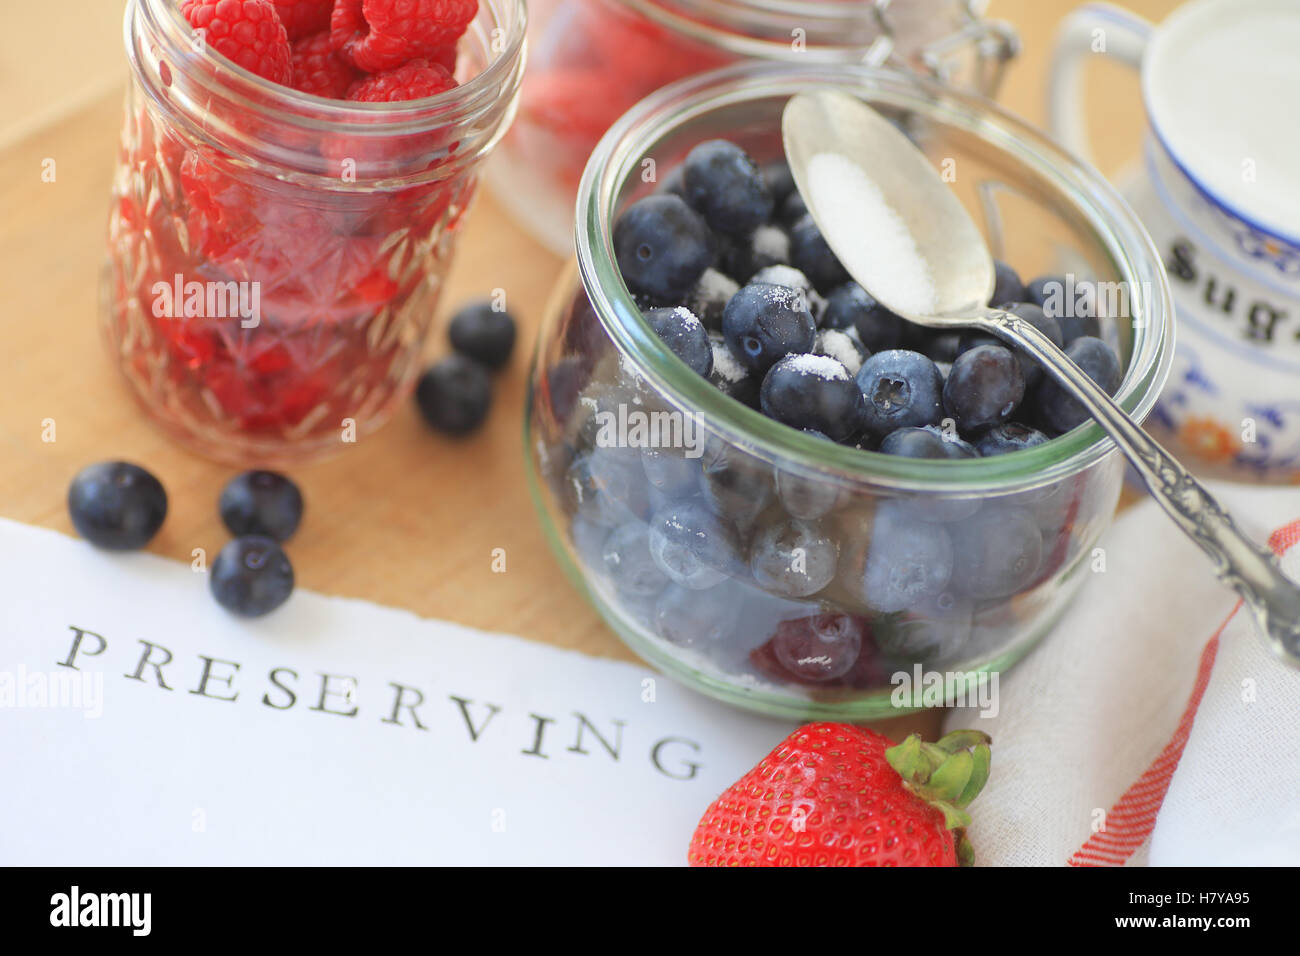 Blueberries, raspberries and strawberries in glass jars with sugar ready for making jam Stock Photo